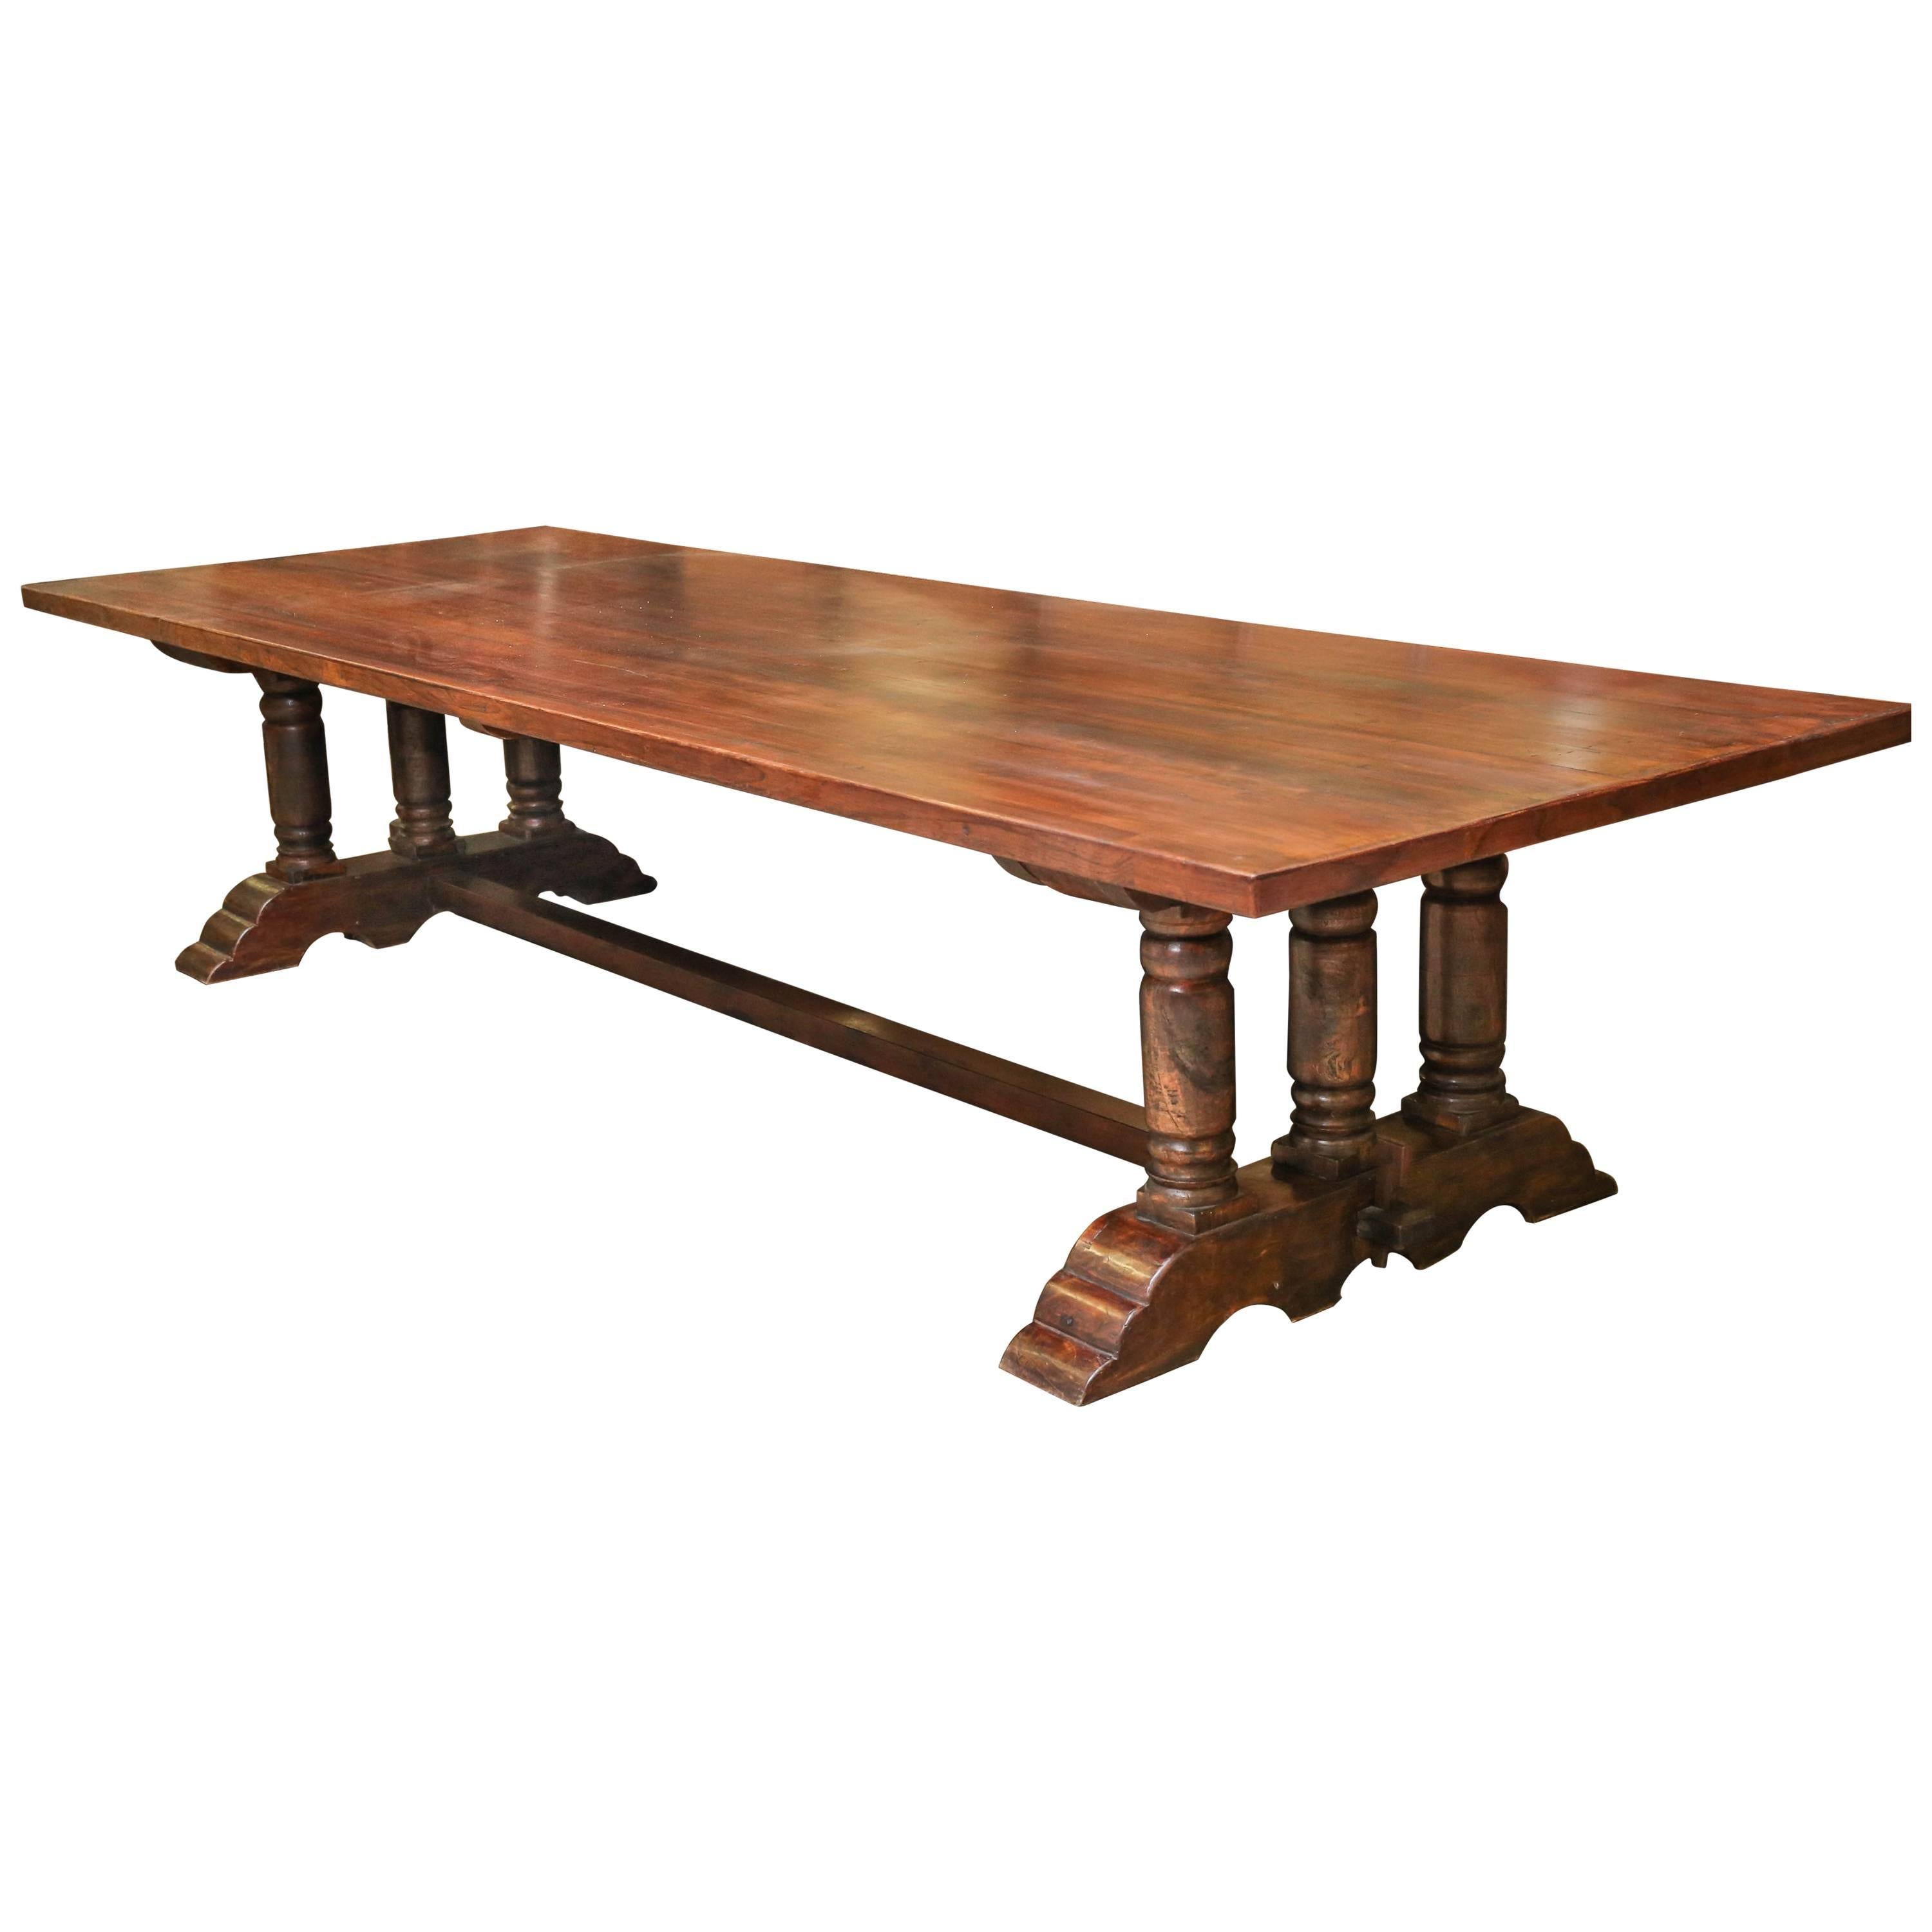 Custom-Made 1920s Solid Teak Wood Plantation Dining Table For Sale